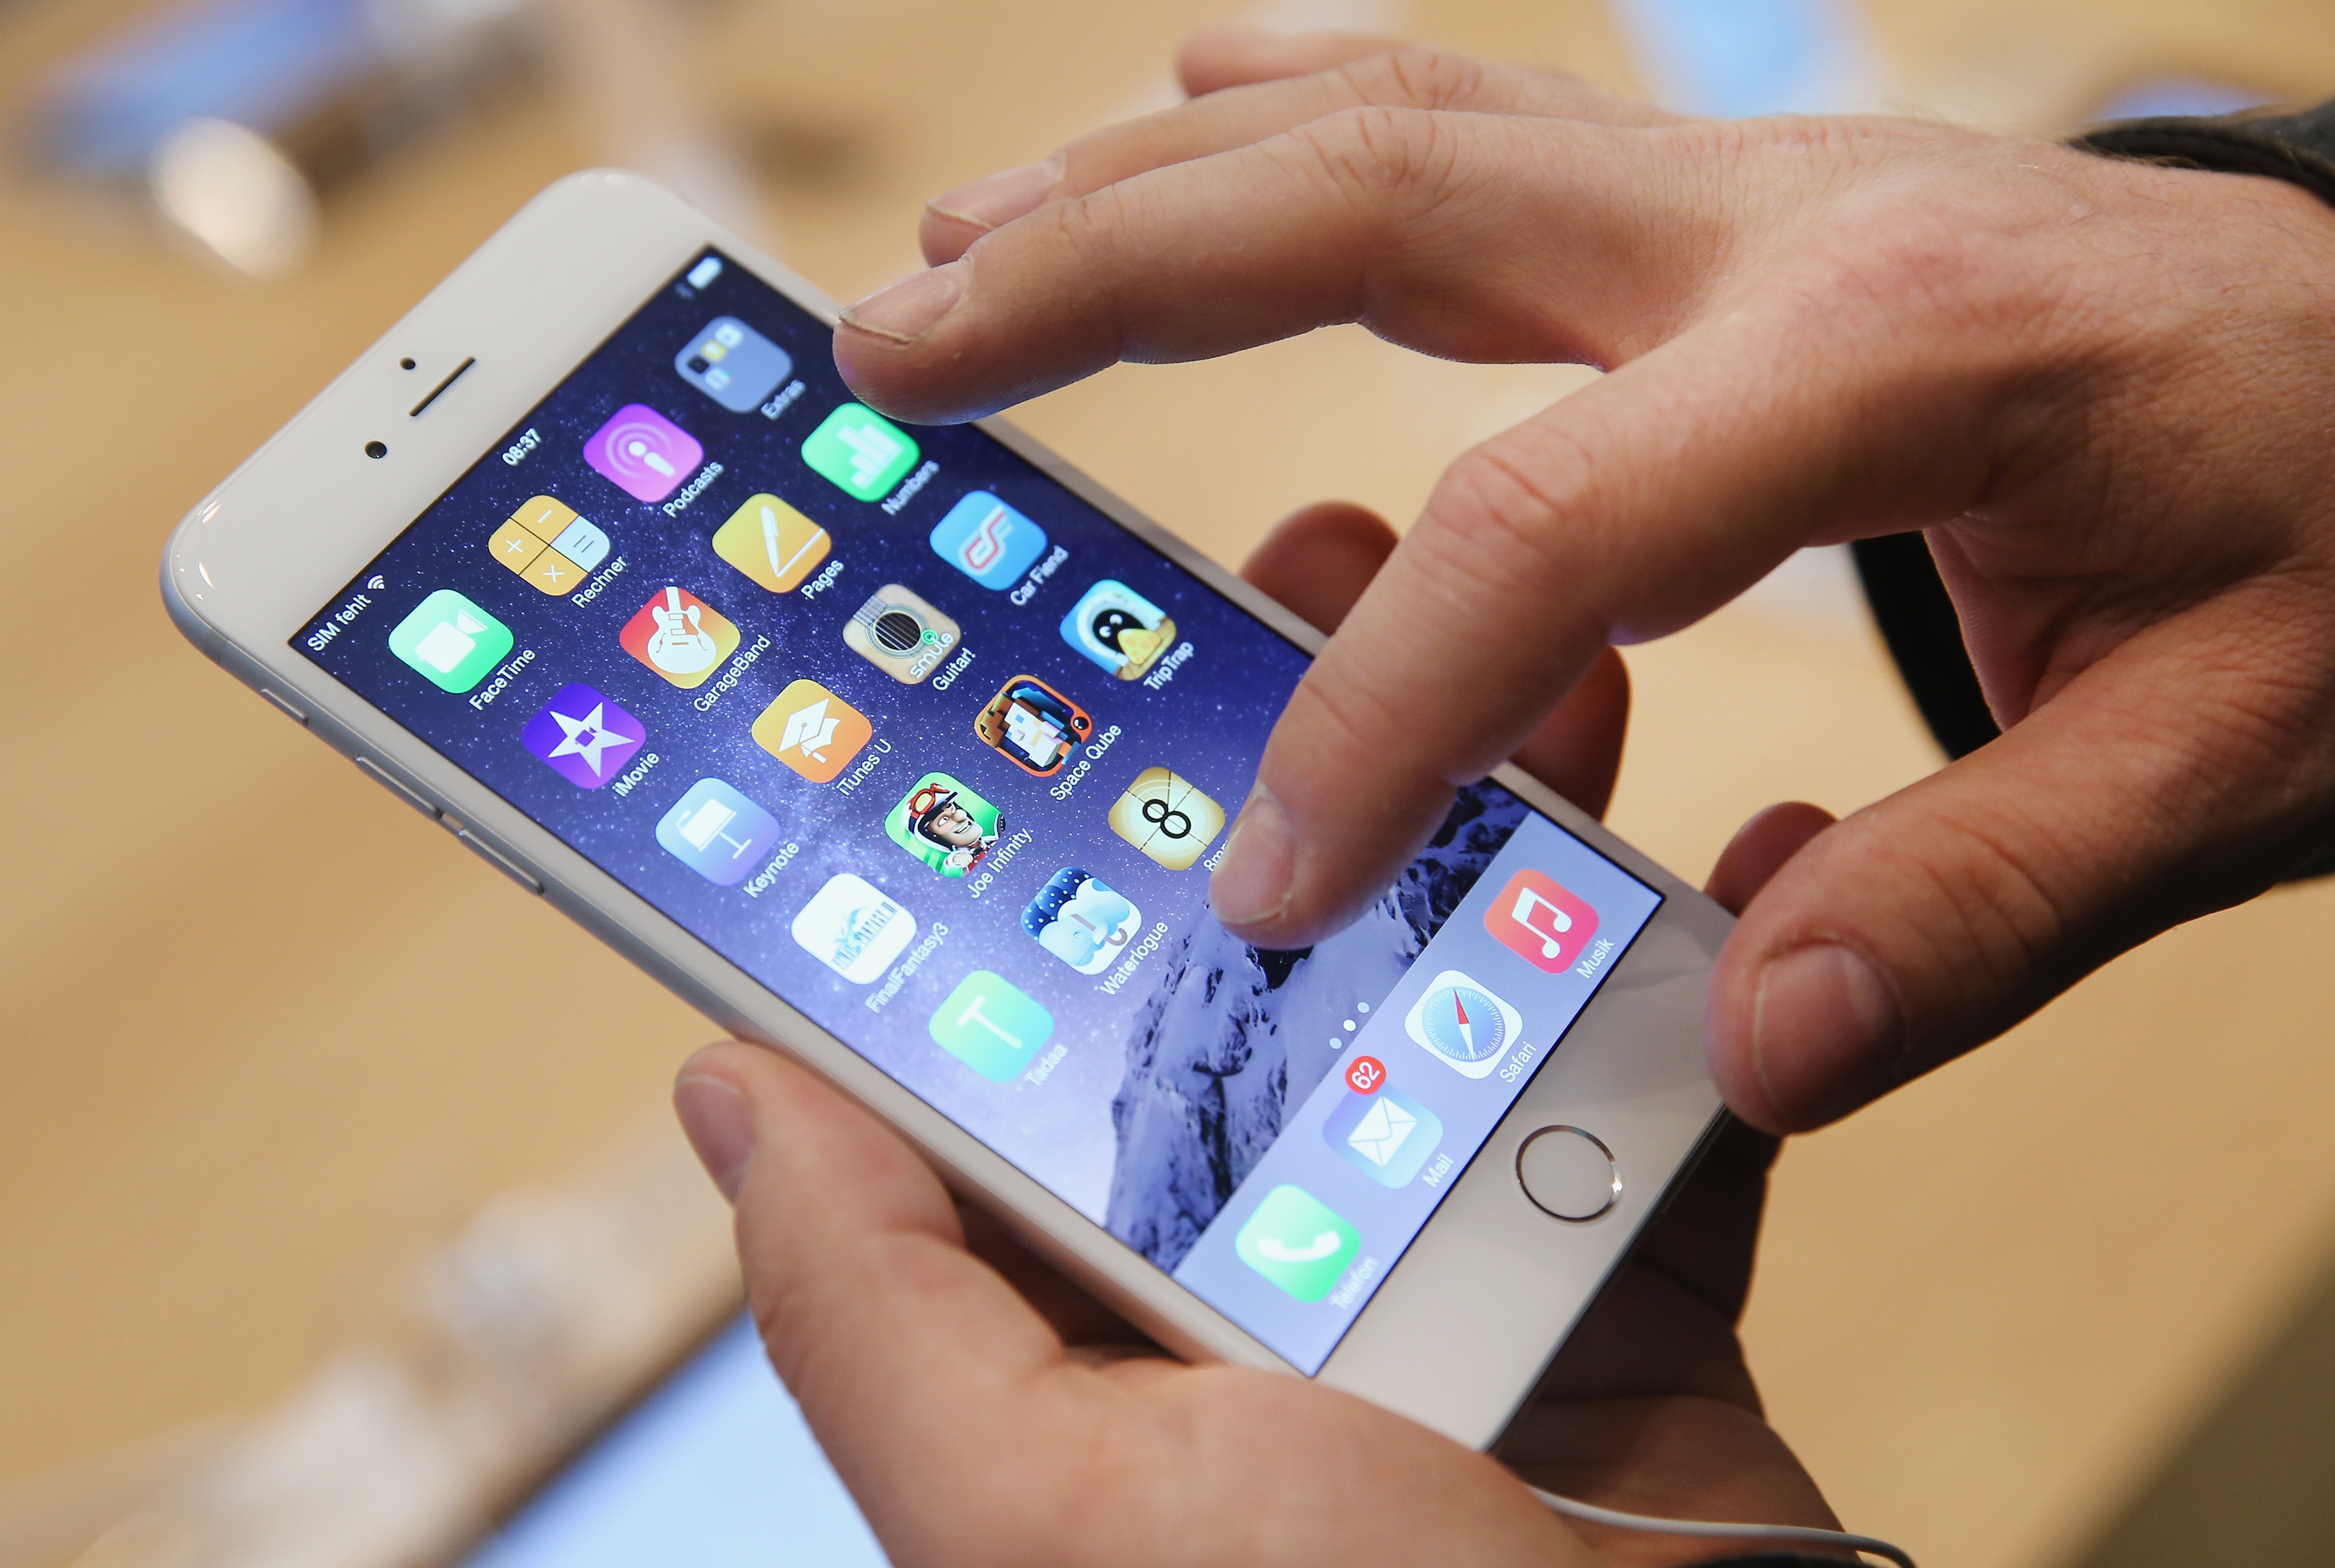 A shopper tries out the new Apple iPhone 6 at the Apple Store on the first day of sales of the new phone in Germany on September 19, 2014 in Berlin, Germany. (Sean Gallup&mdash;Getty Images)